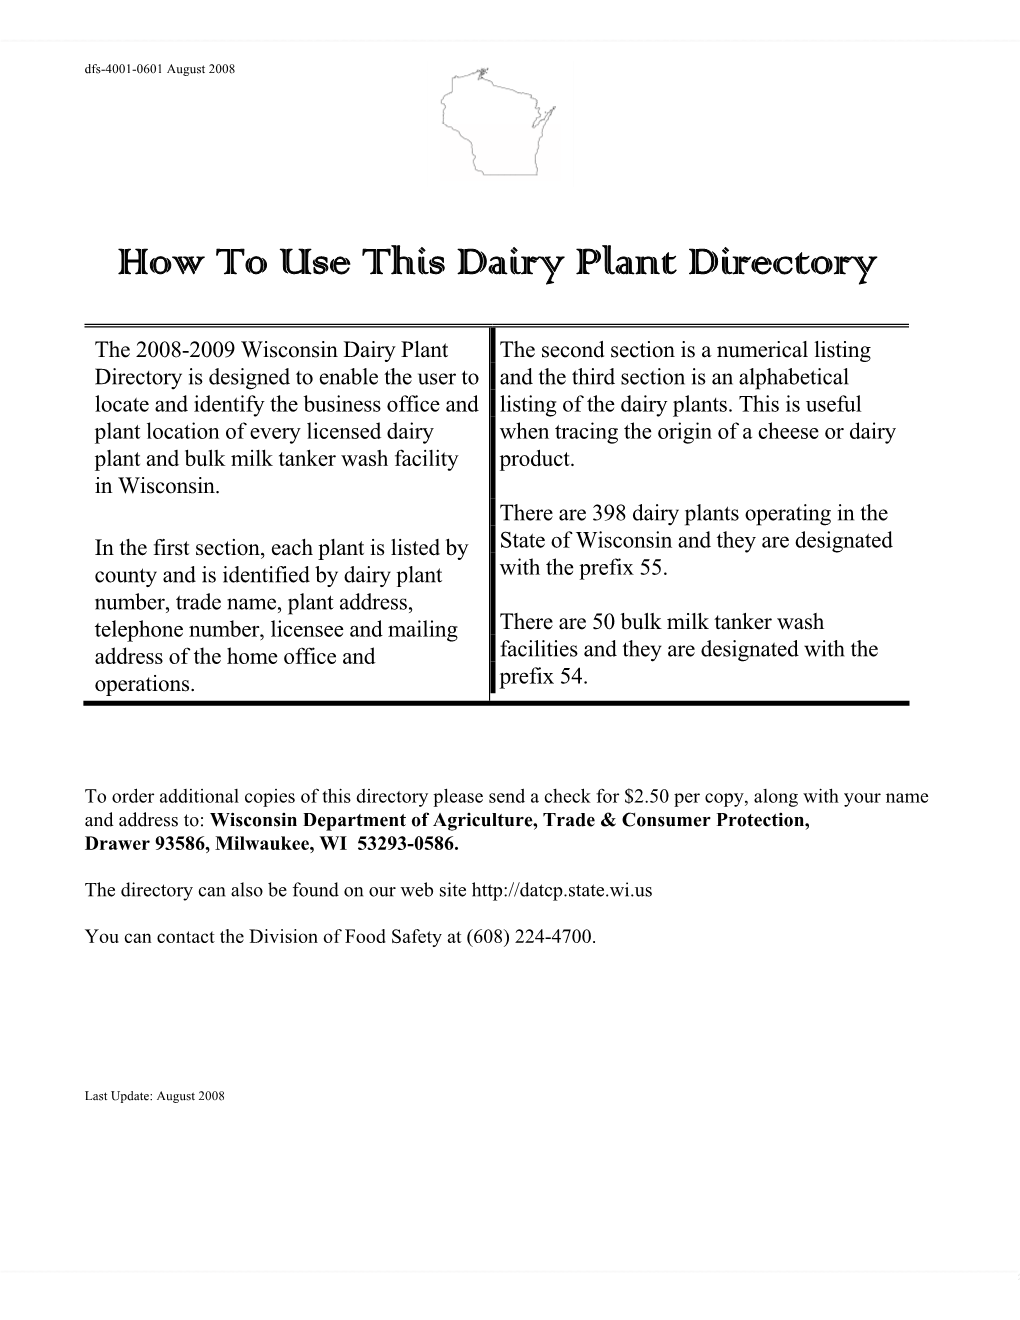 How to Use This Dairy Plant Directory